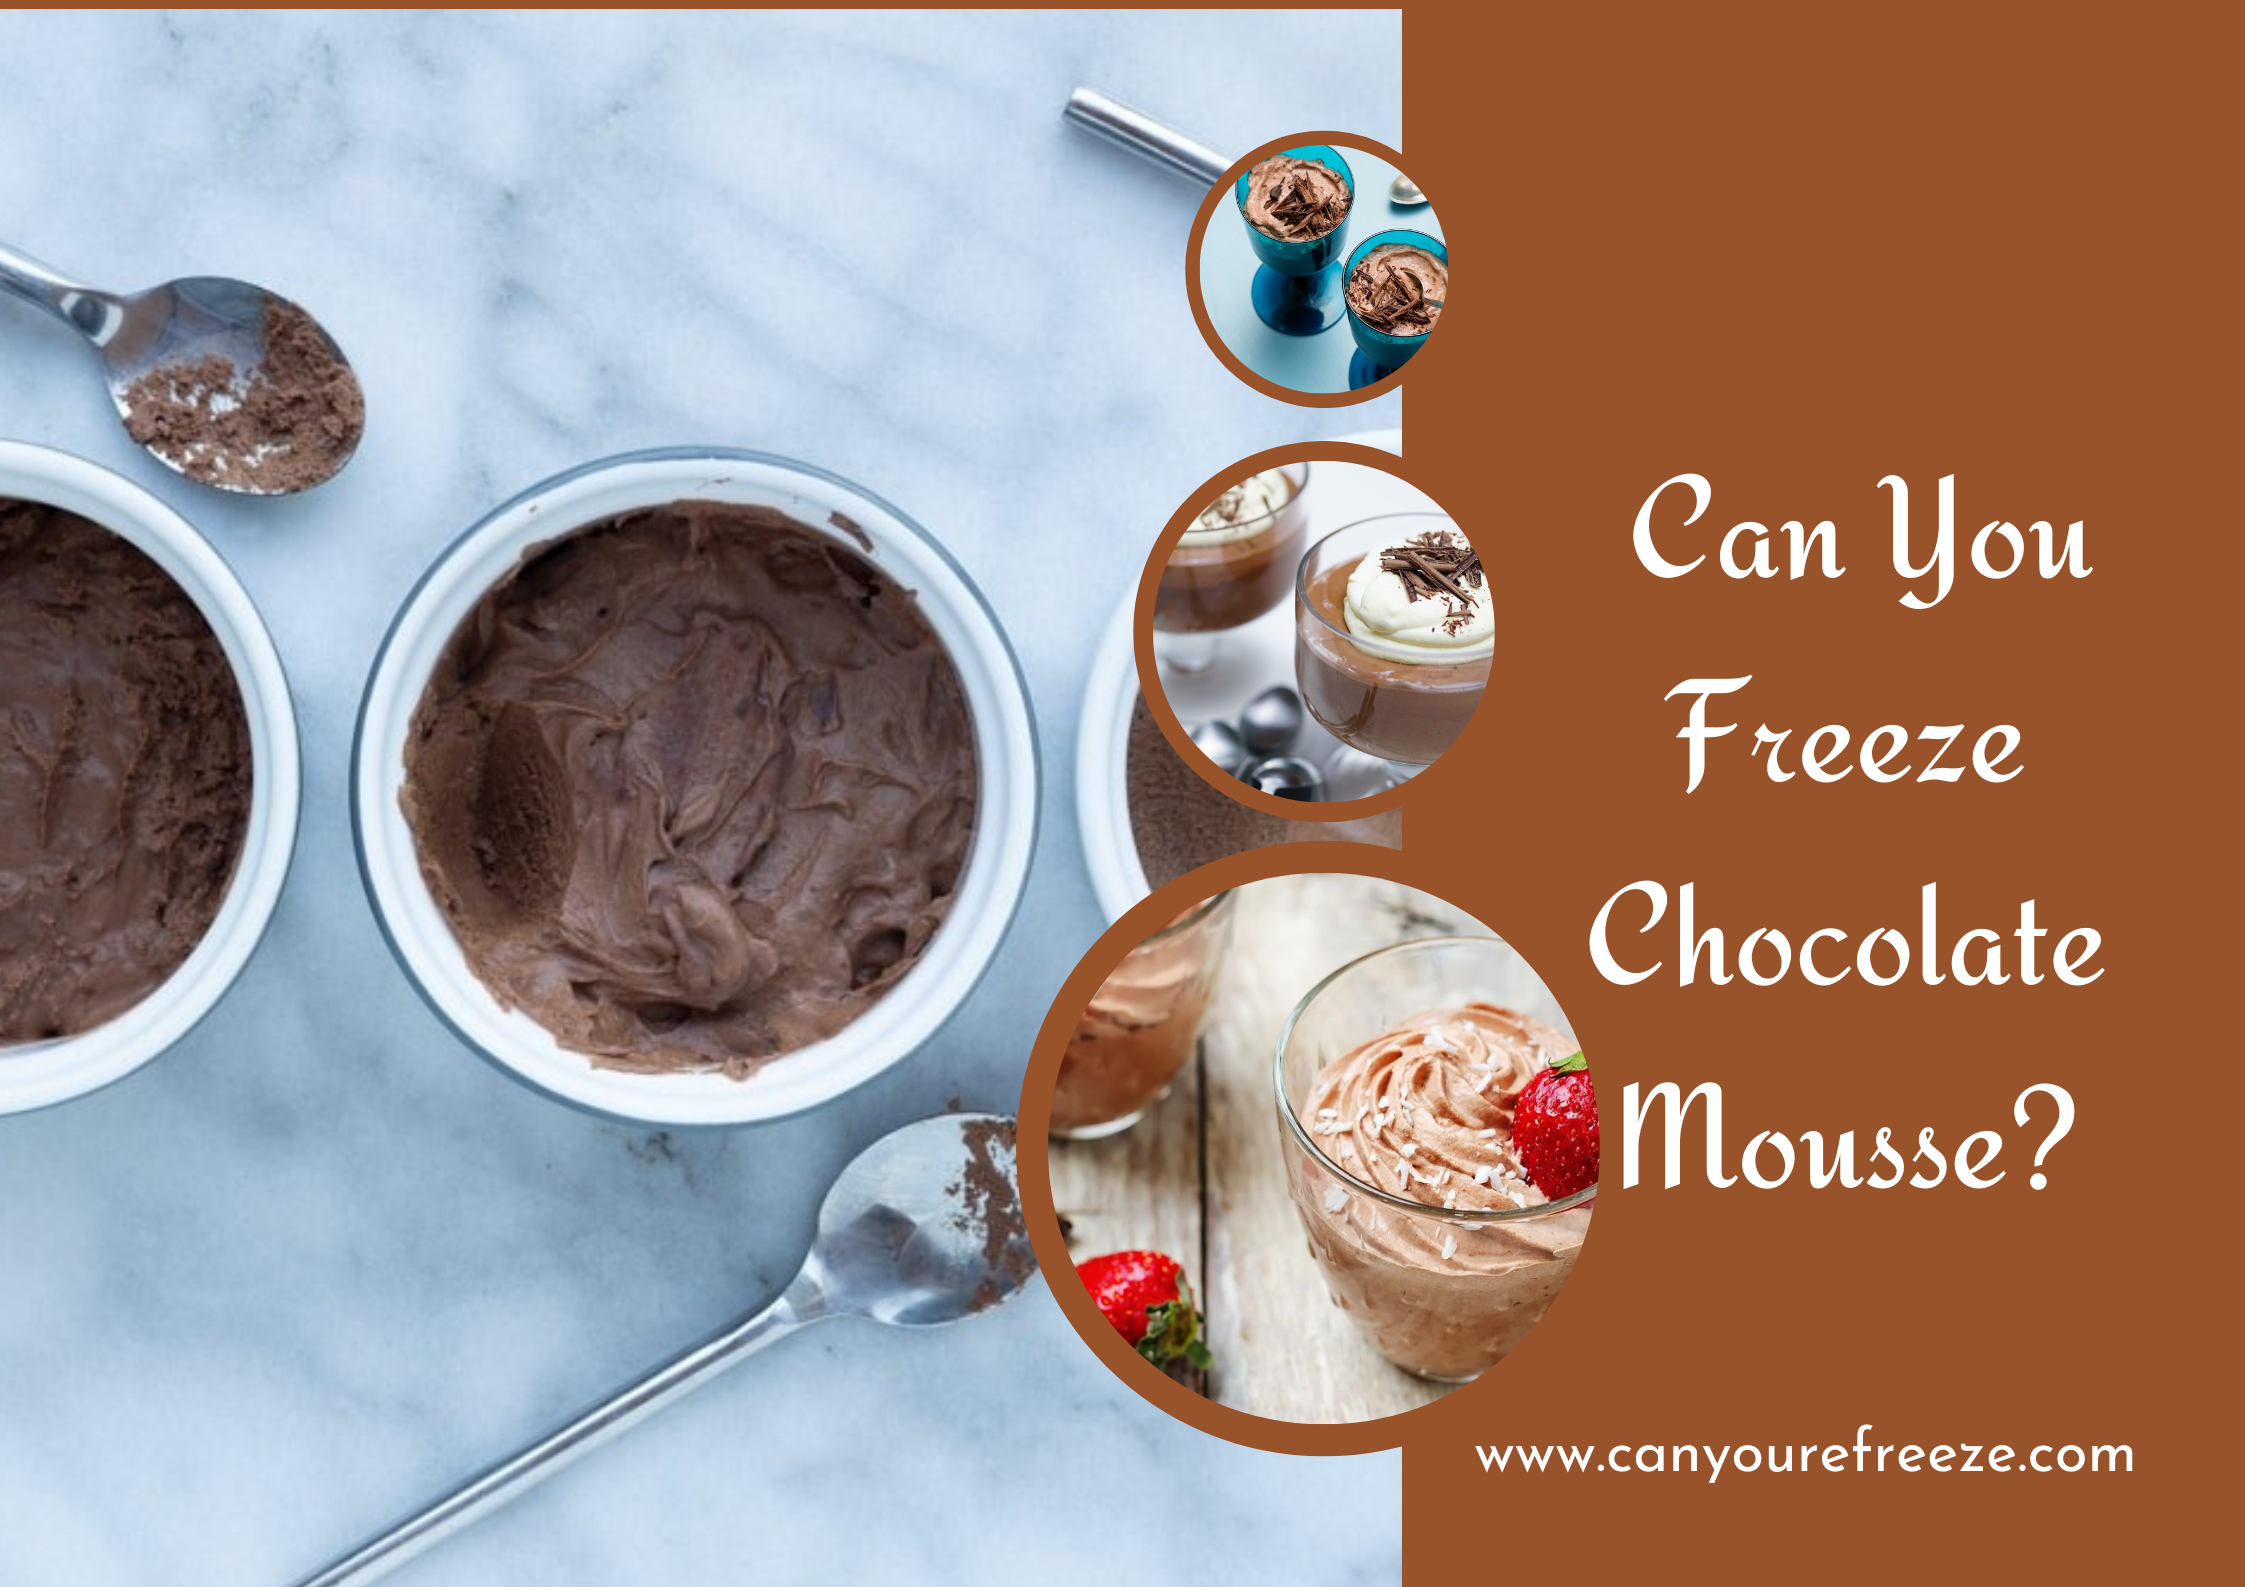 Can You Freeze Chocolate Mousse